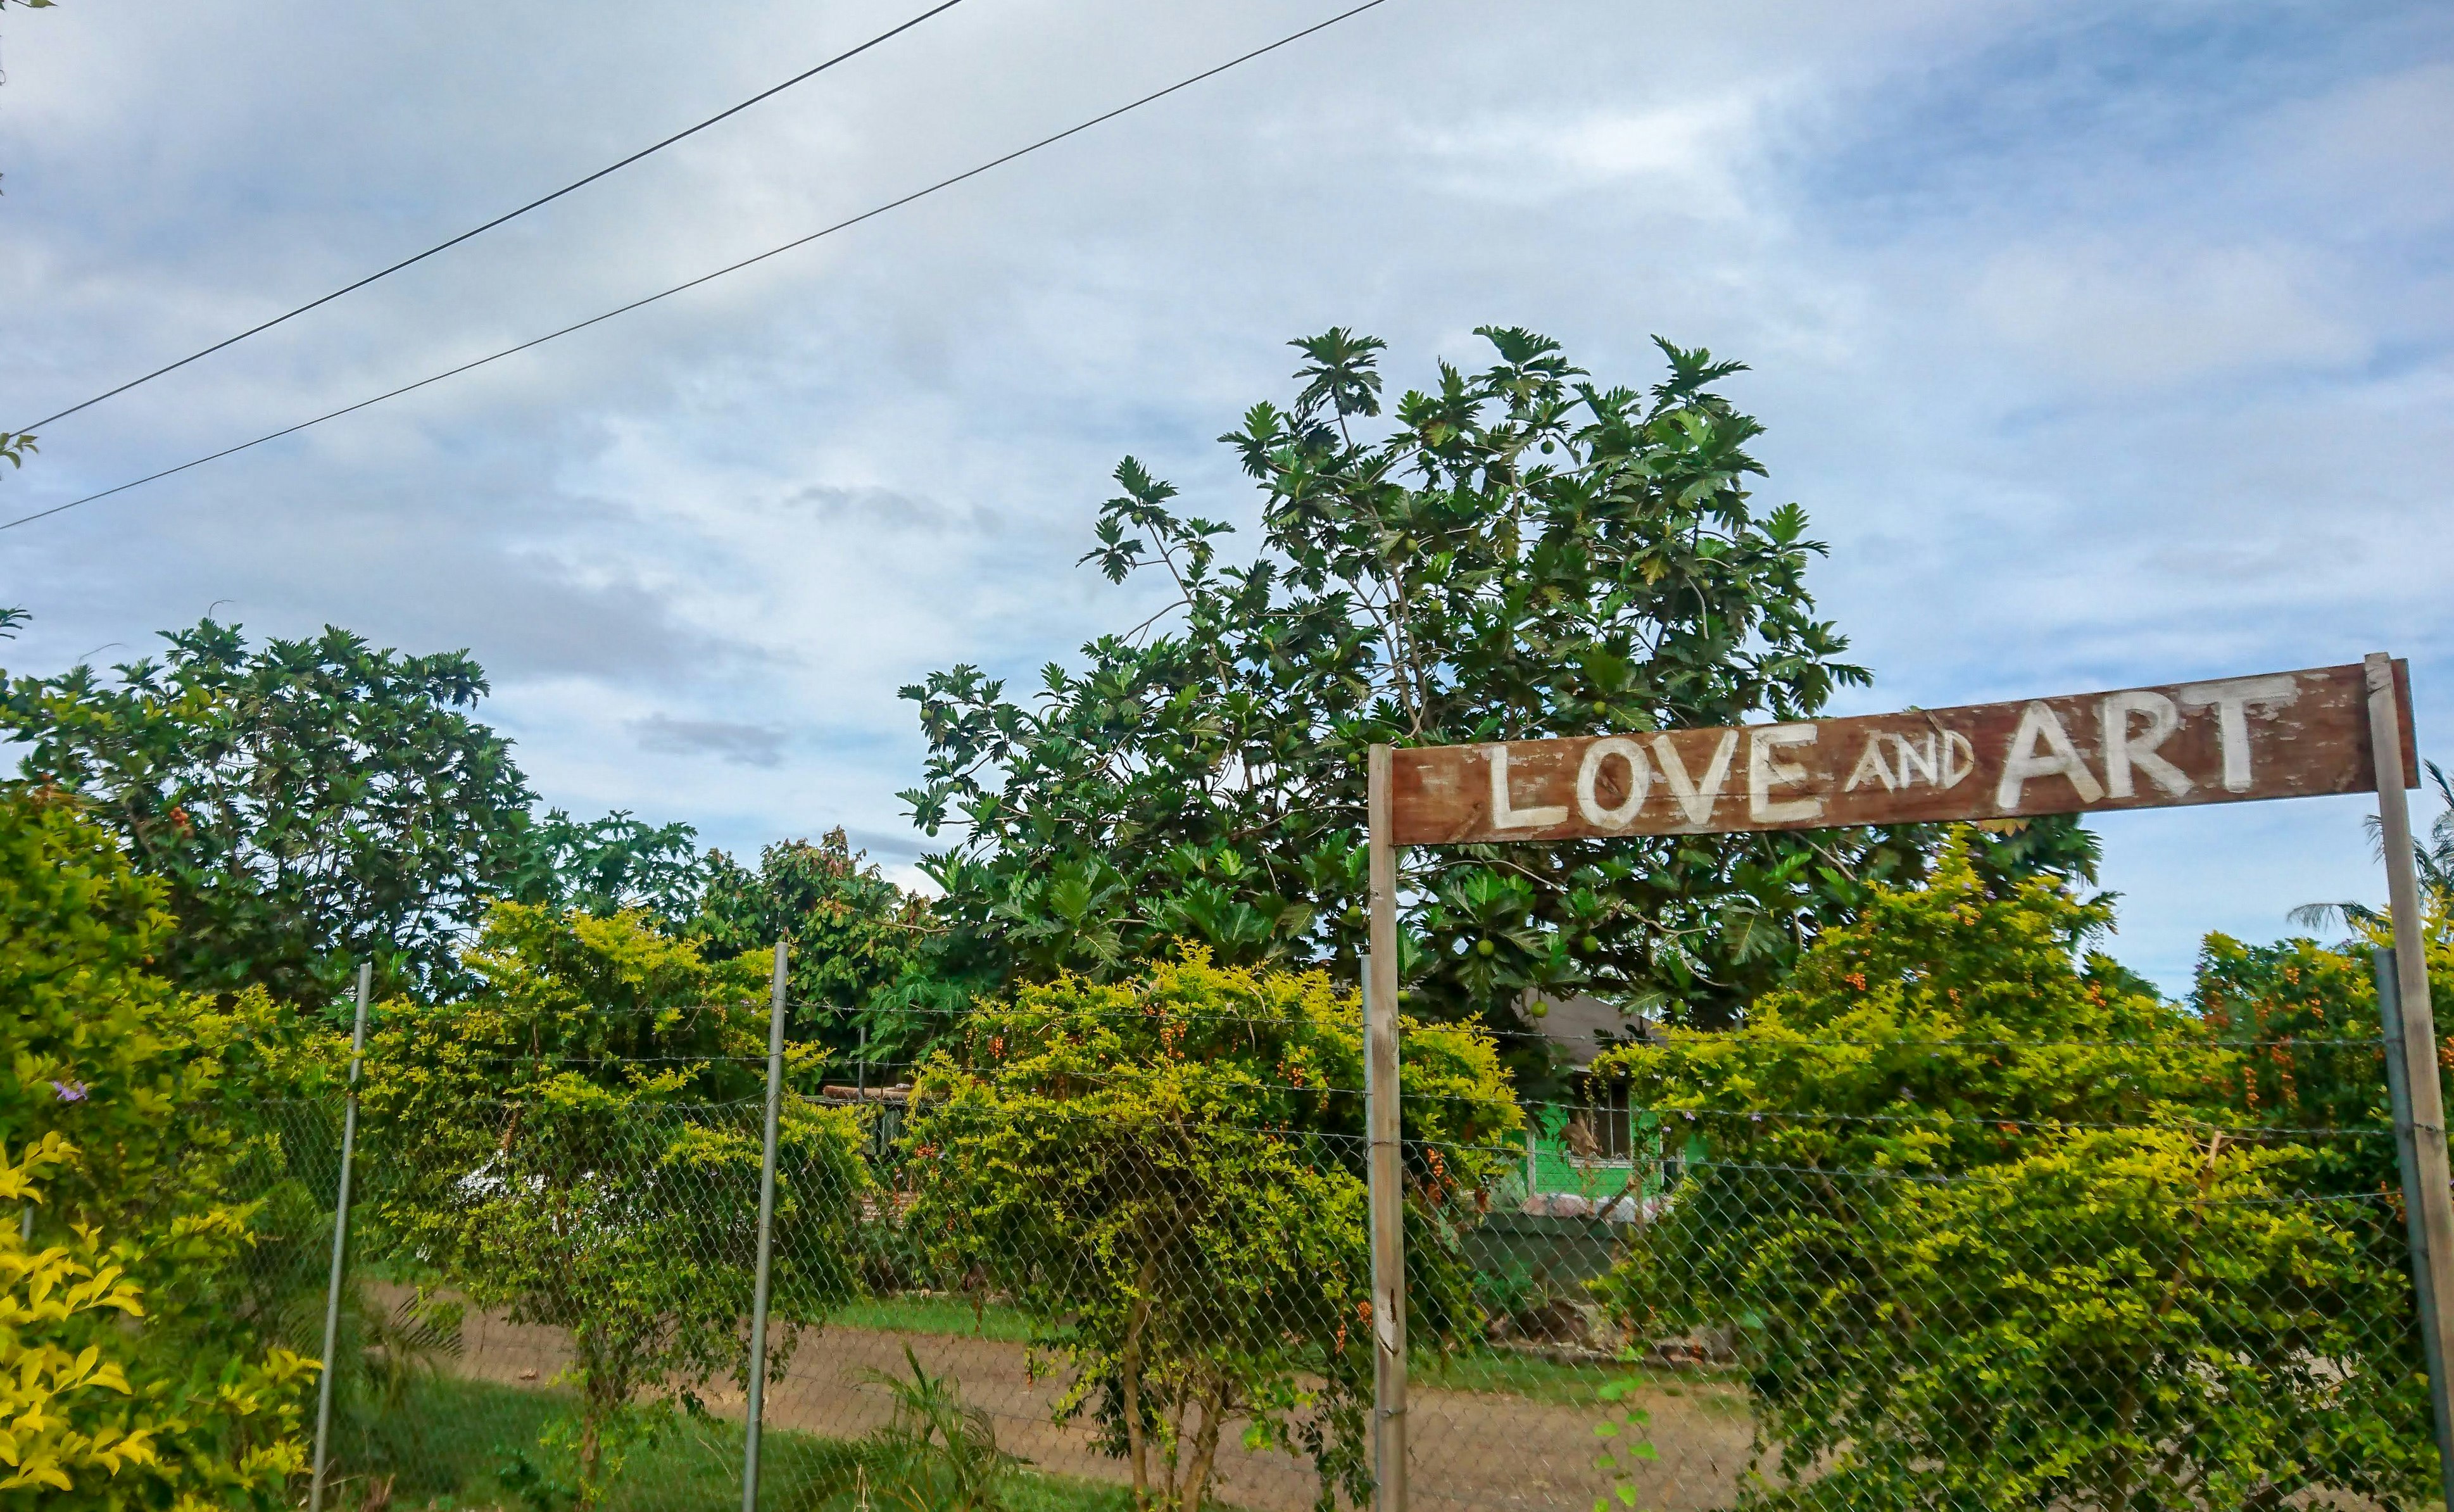 A wire fence surrounded by green vegetation, next to a wooden sign scrawled with the words "Love and Art".